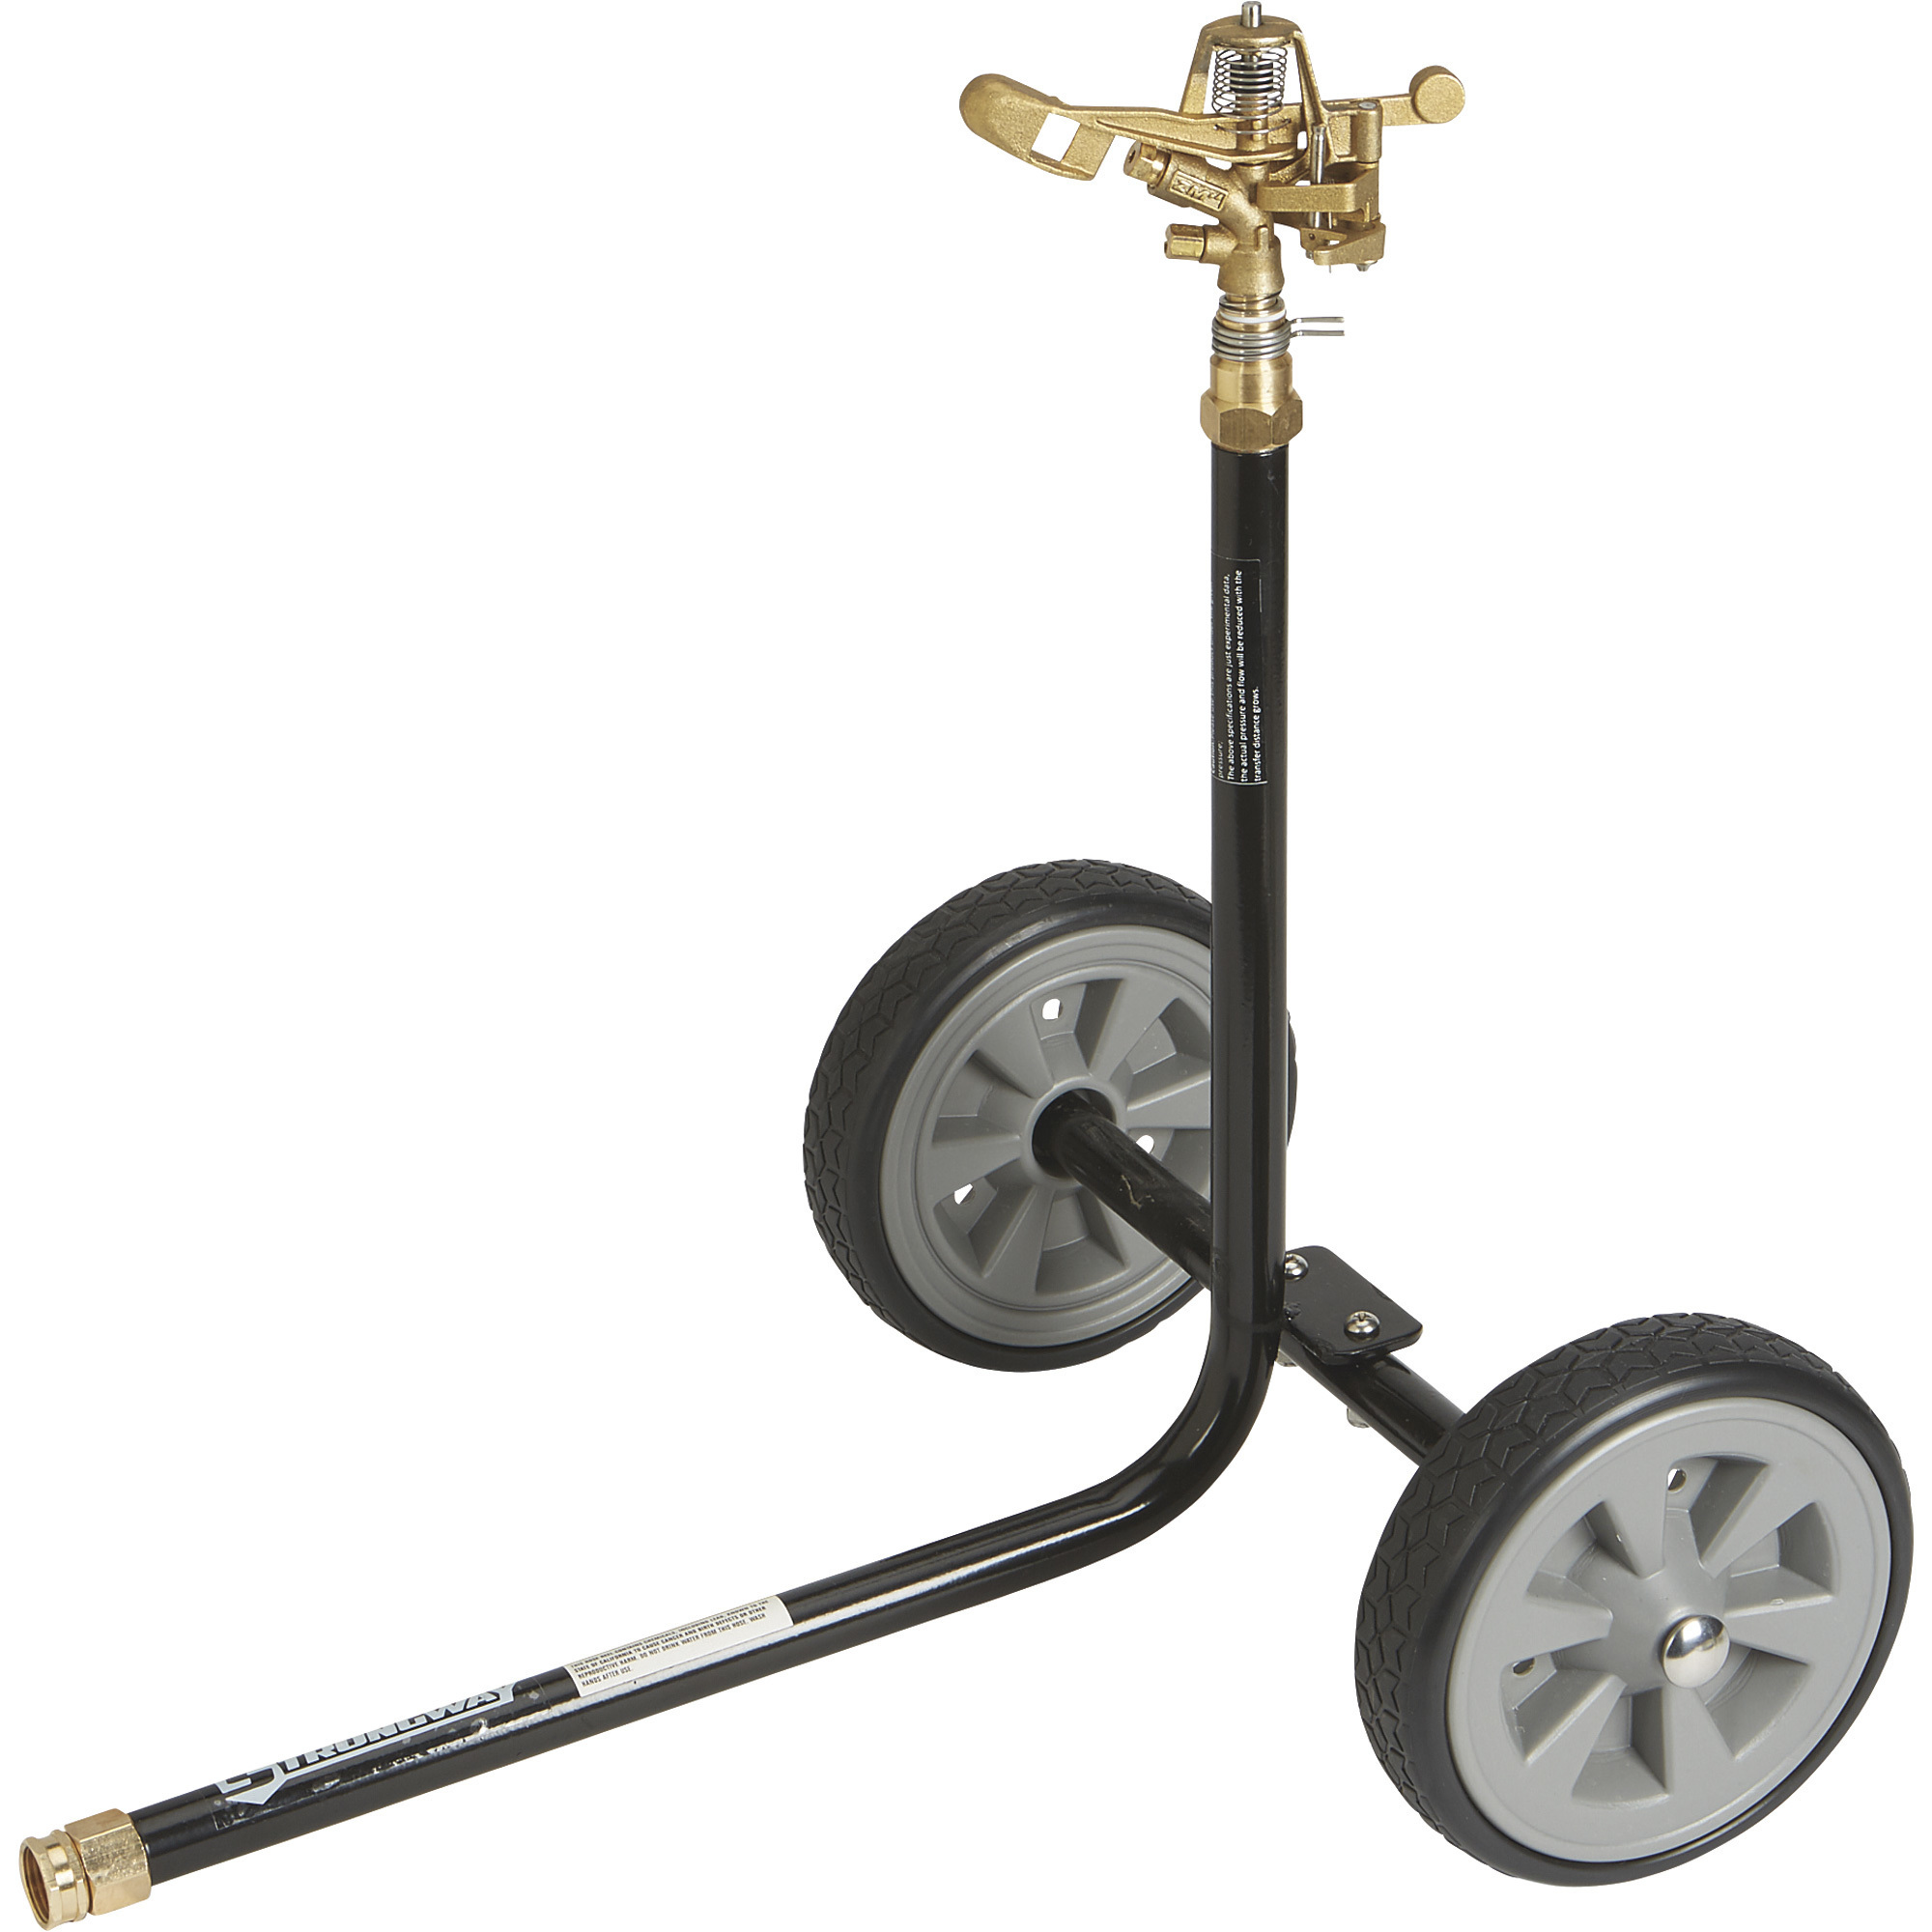 Strongway Wheeled Sprinkler, 3/4Inch Brass Sprinkler Head with 2 Nozzles, 8Inch Poly Wheels